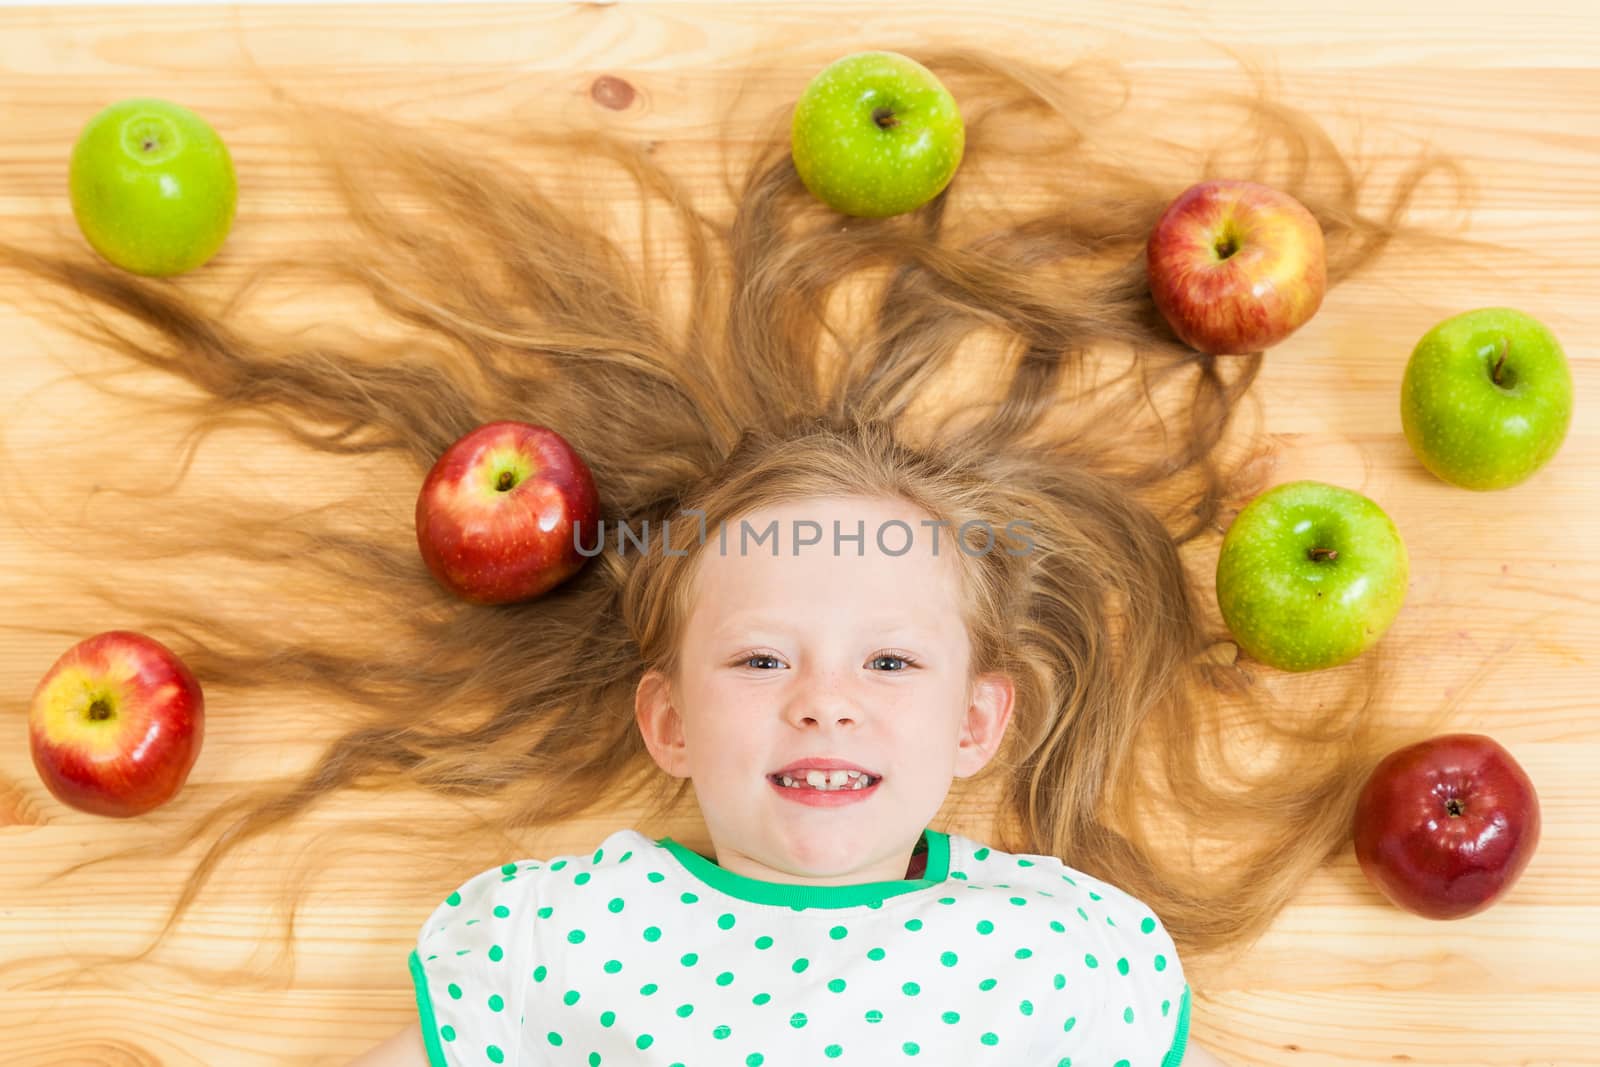 the little girl among apples on a wooden background